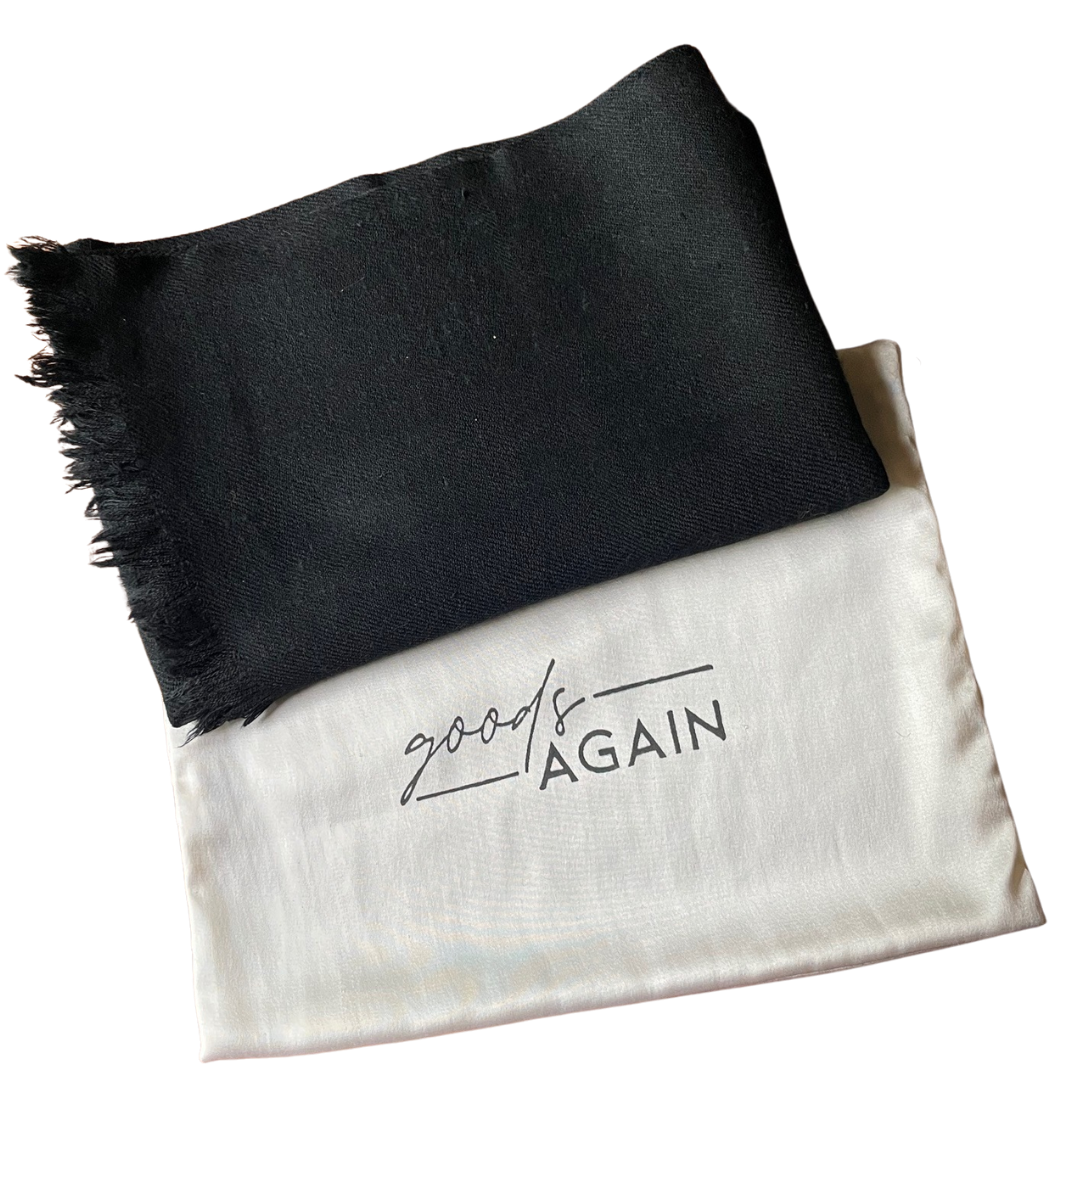 The Upcycled Chic scarf- Midnight Black